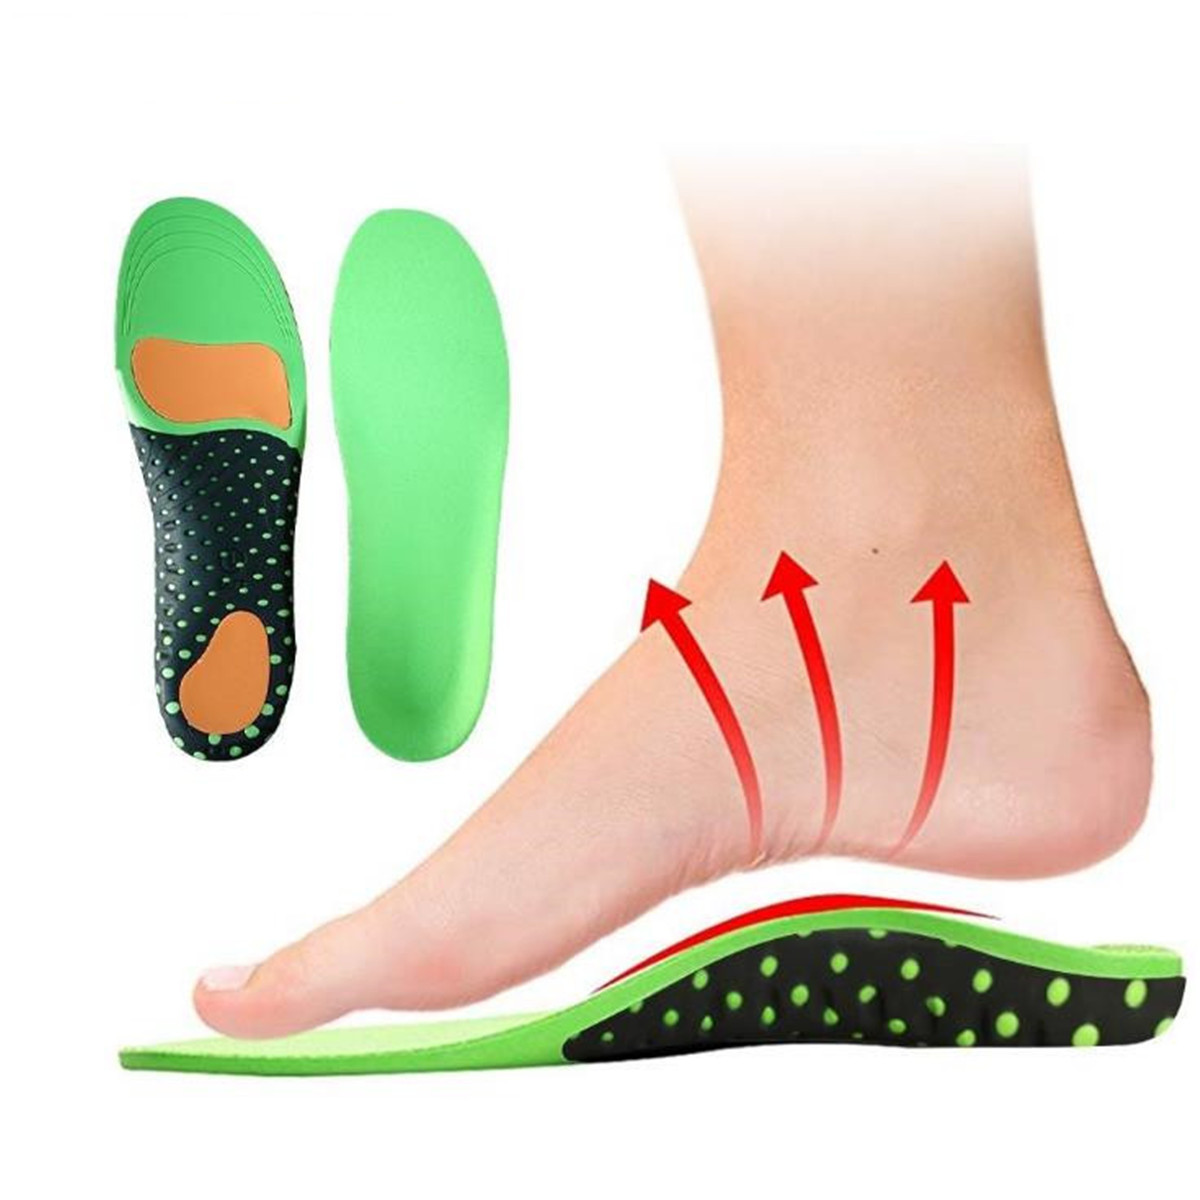 medical insoles for flat feet